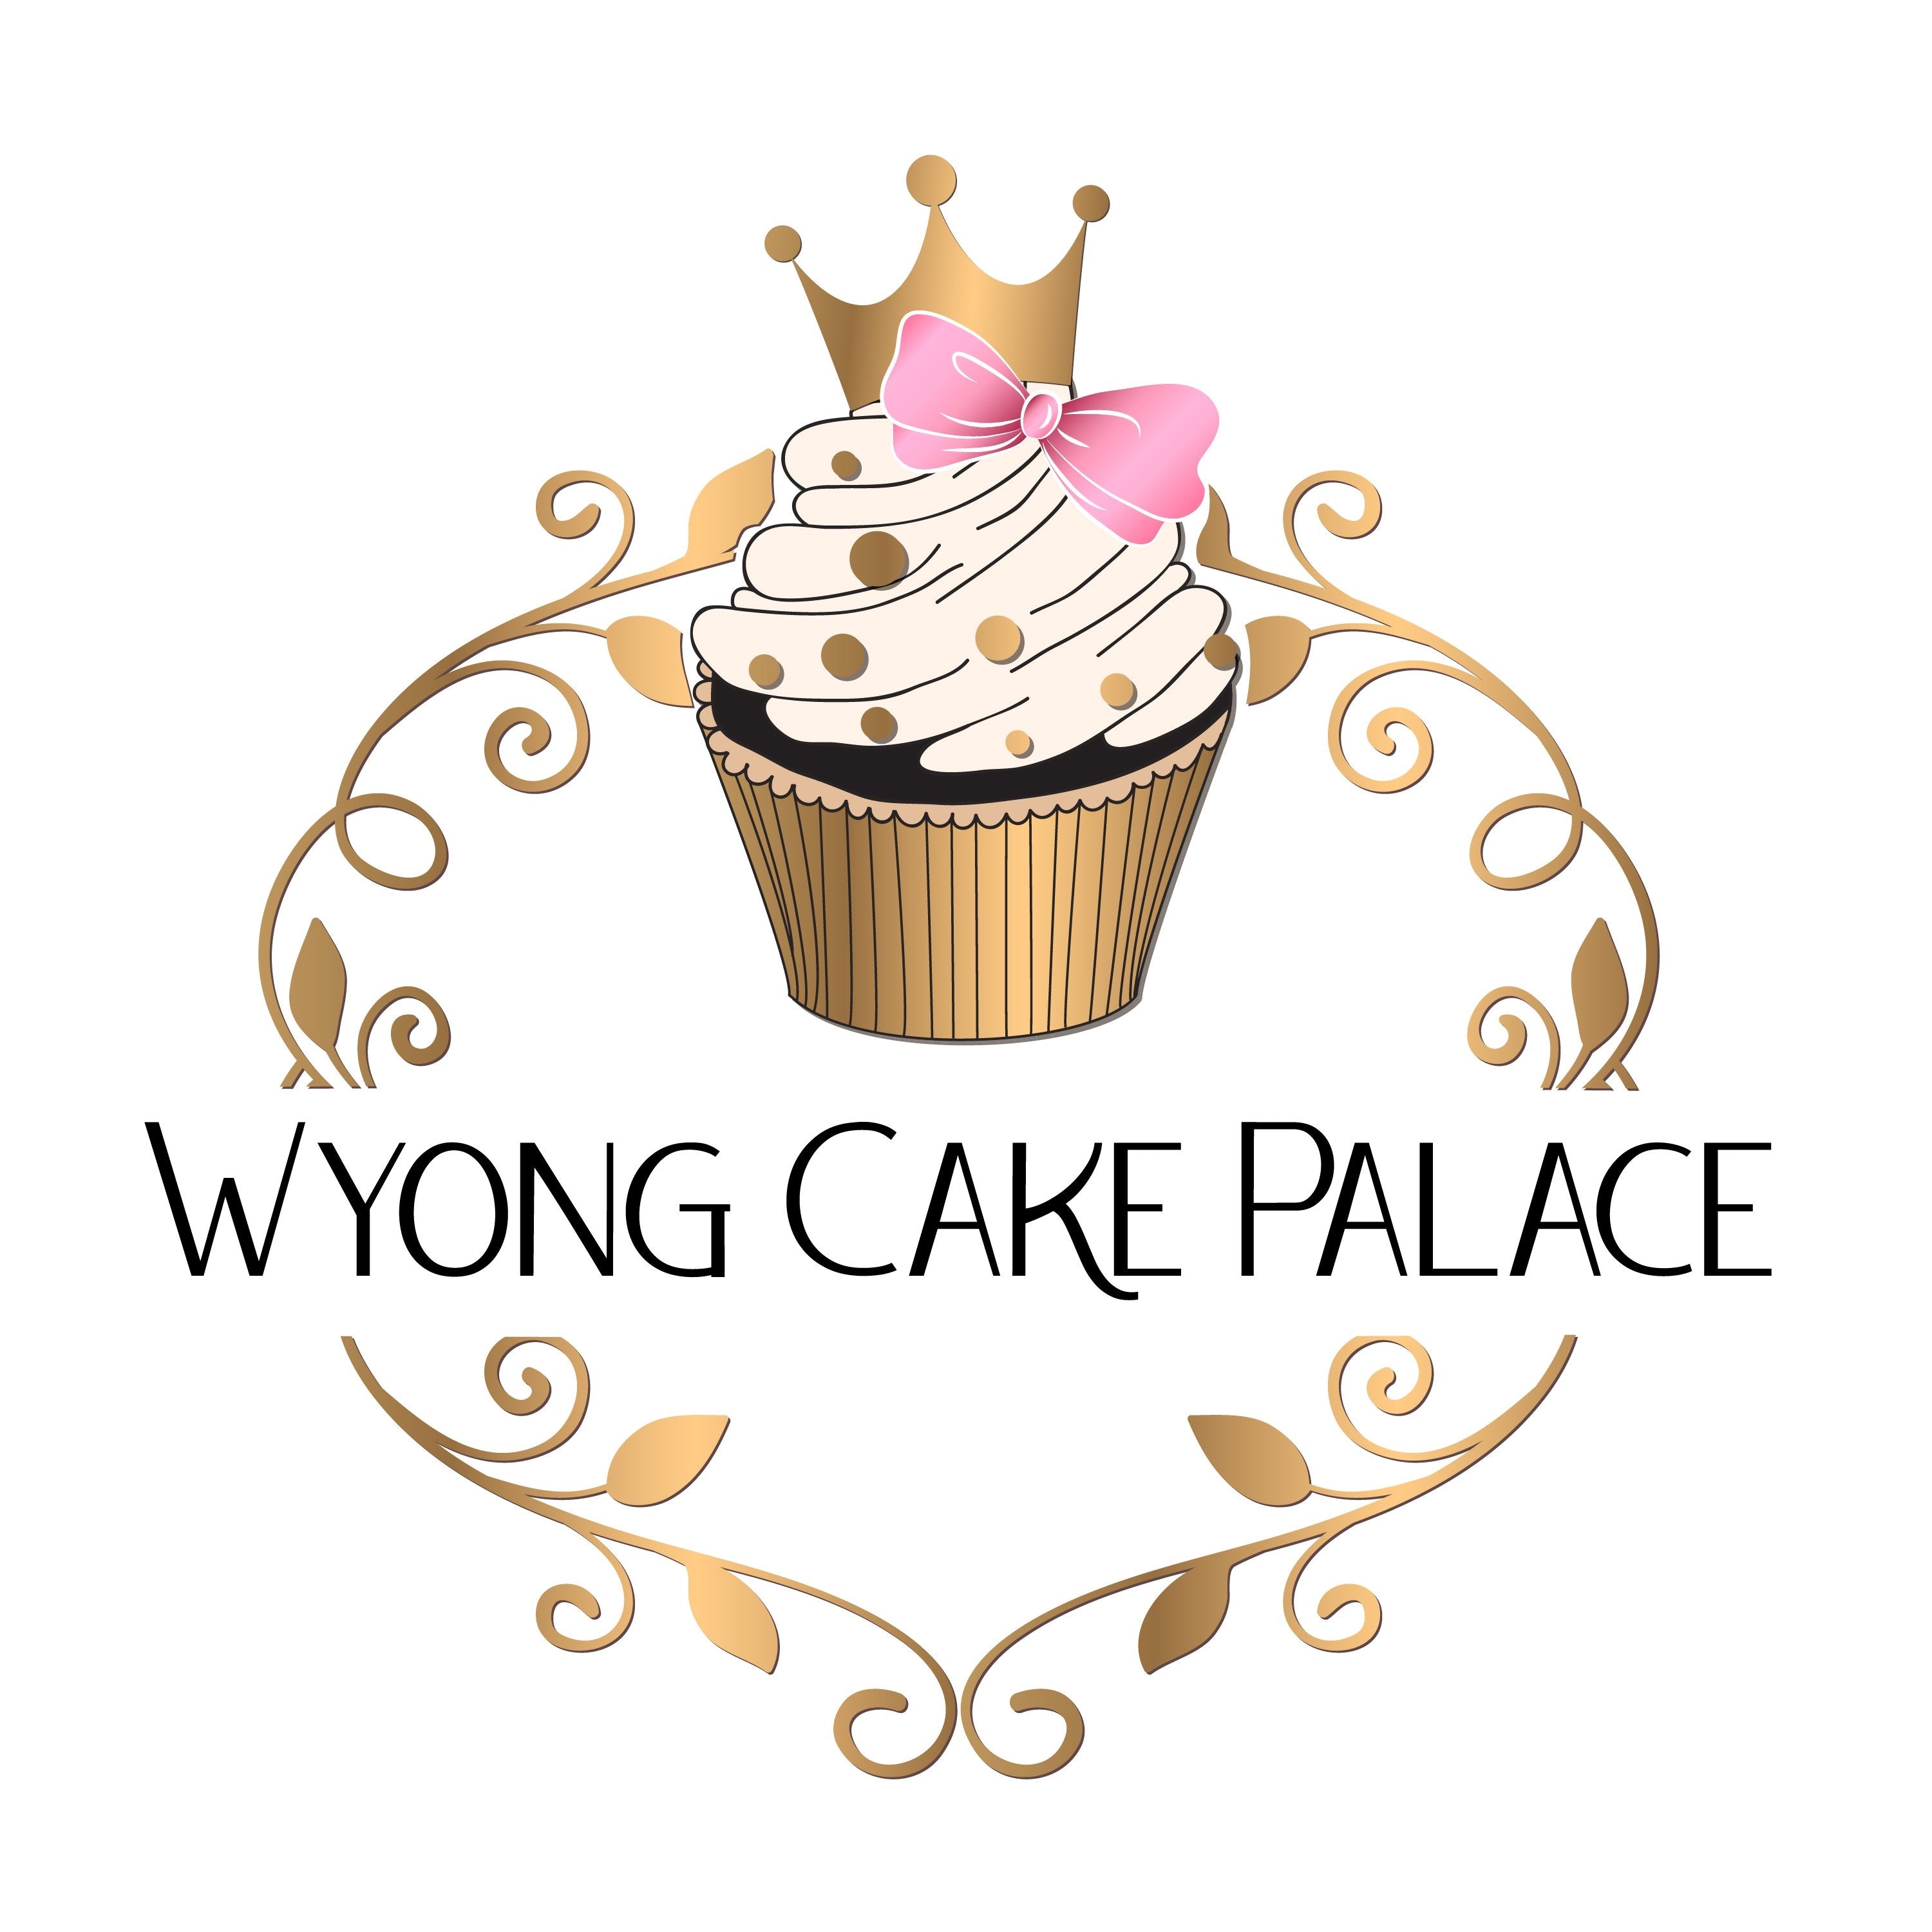 Cake Palace By Delight - Chief Executive Officer - Cake Palace By Delight |  LinkedIn